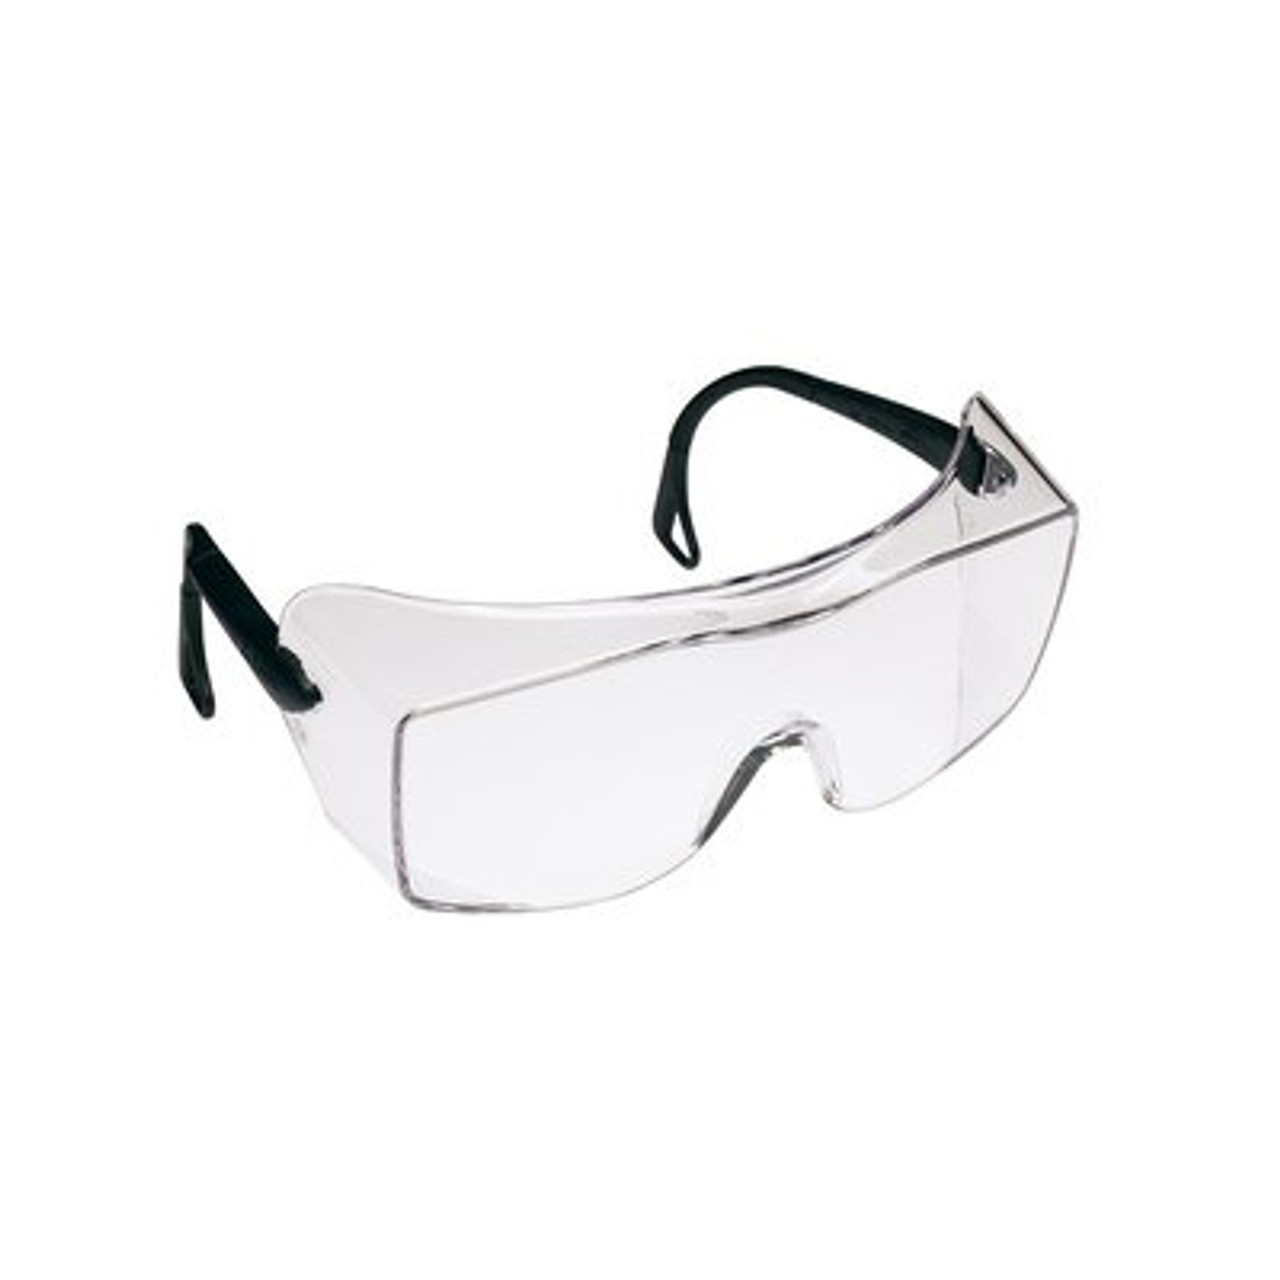 3m Clear Anti Fog Over Glass Safety Glasses Black